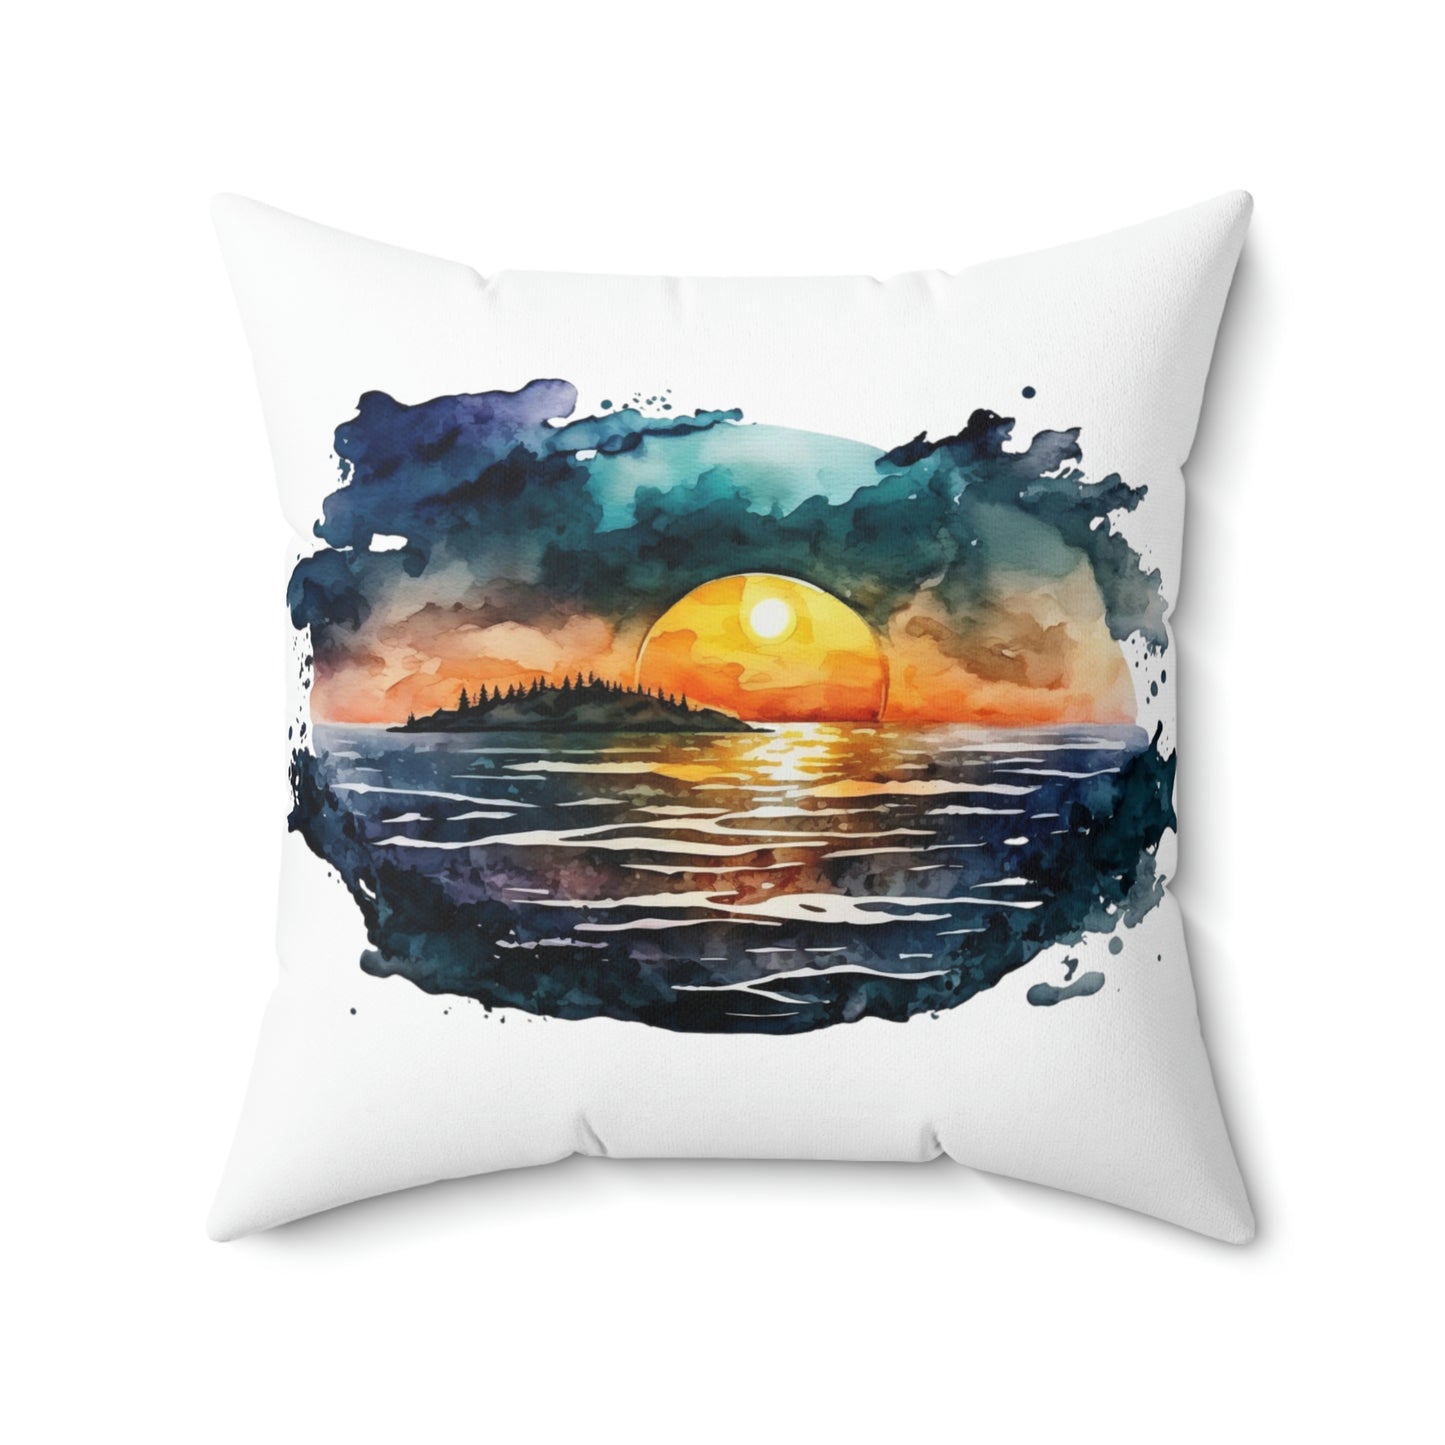 "Sunset At The Lake" Throw Pillow - Weave Got Gifts - Unique Gifts You Won’t Find Anywhere Else!